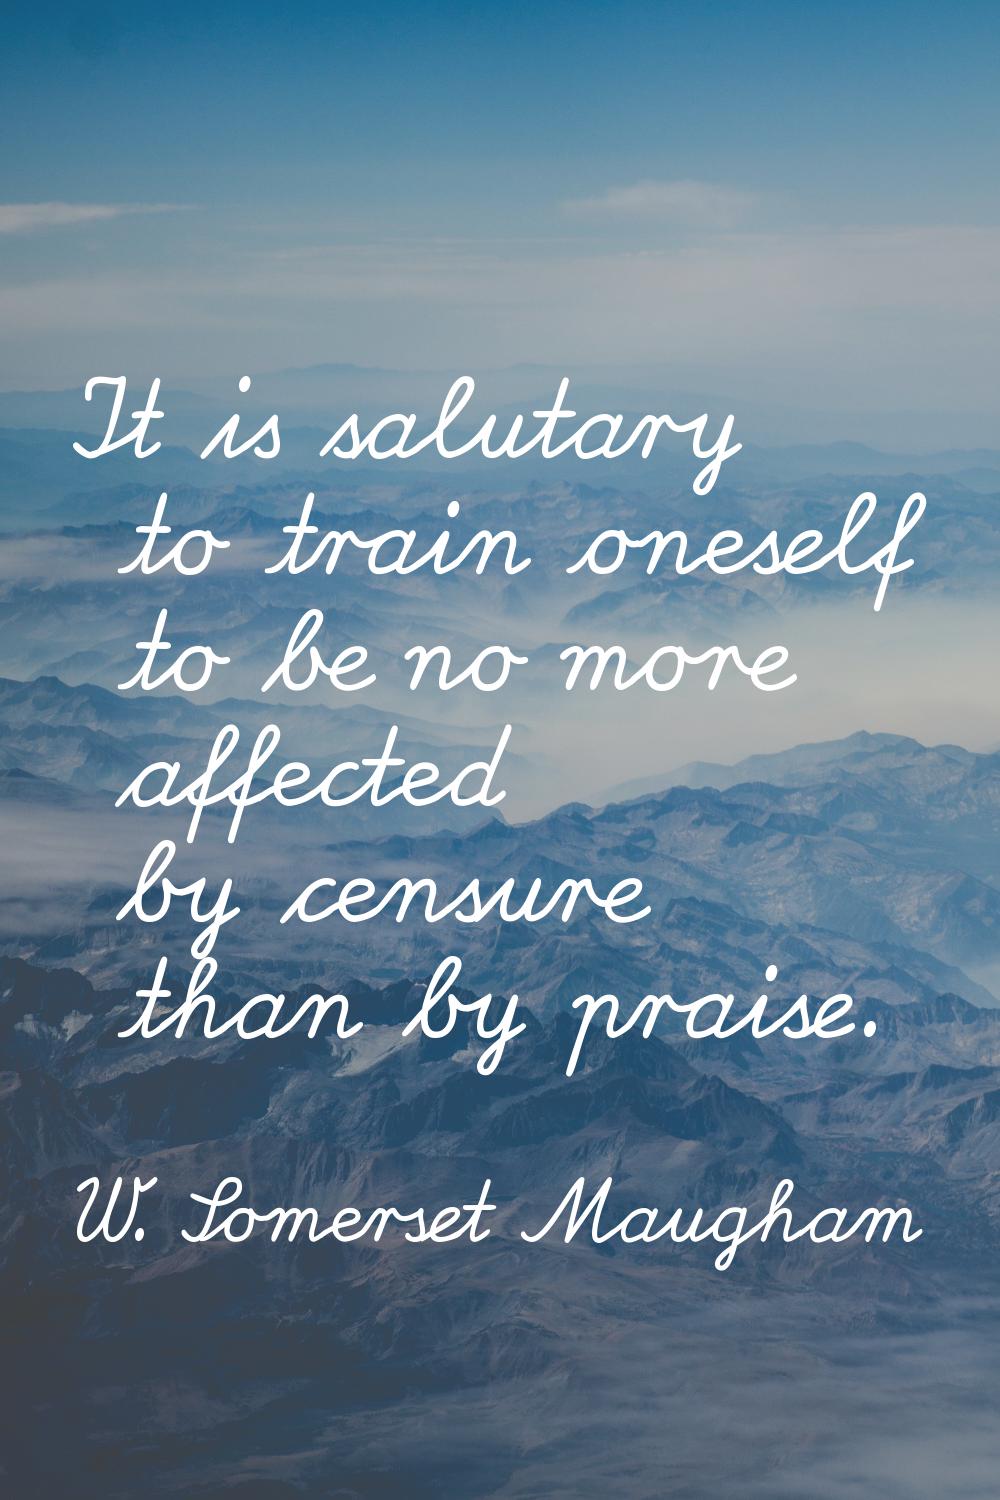 It is salutary to train oneself to be no more affected by censure than by praise.